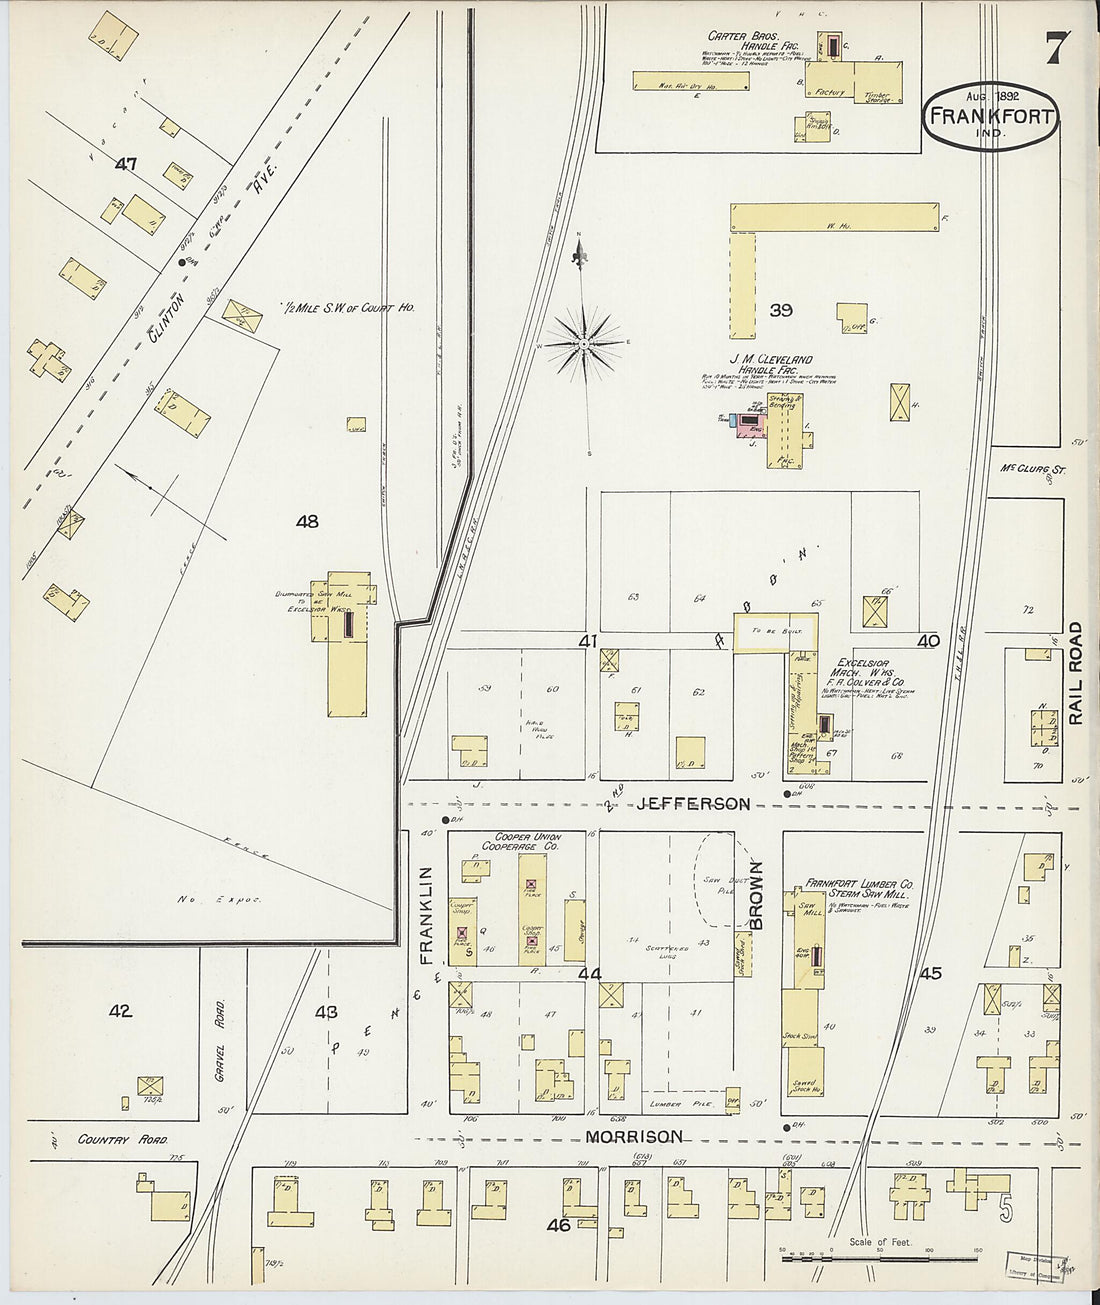 This old map of Frankfort, Clinton County, Indiana was created by Sanborn Map Company in 1892